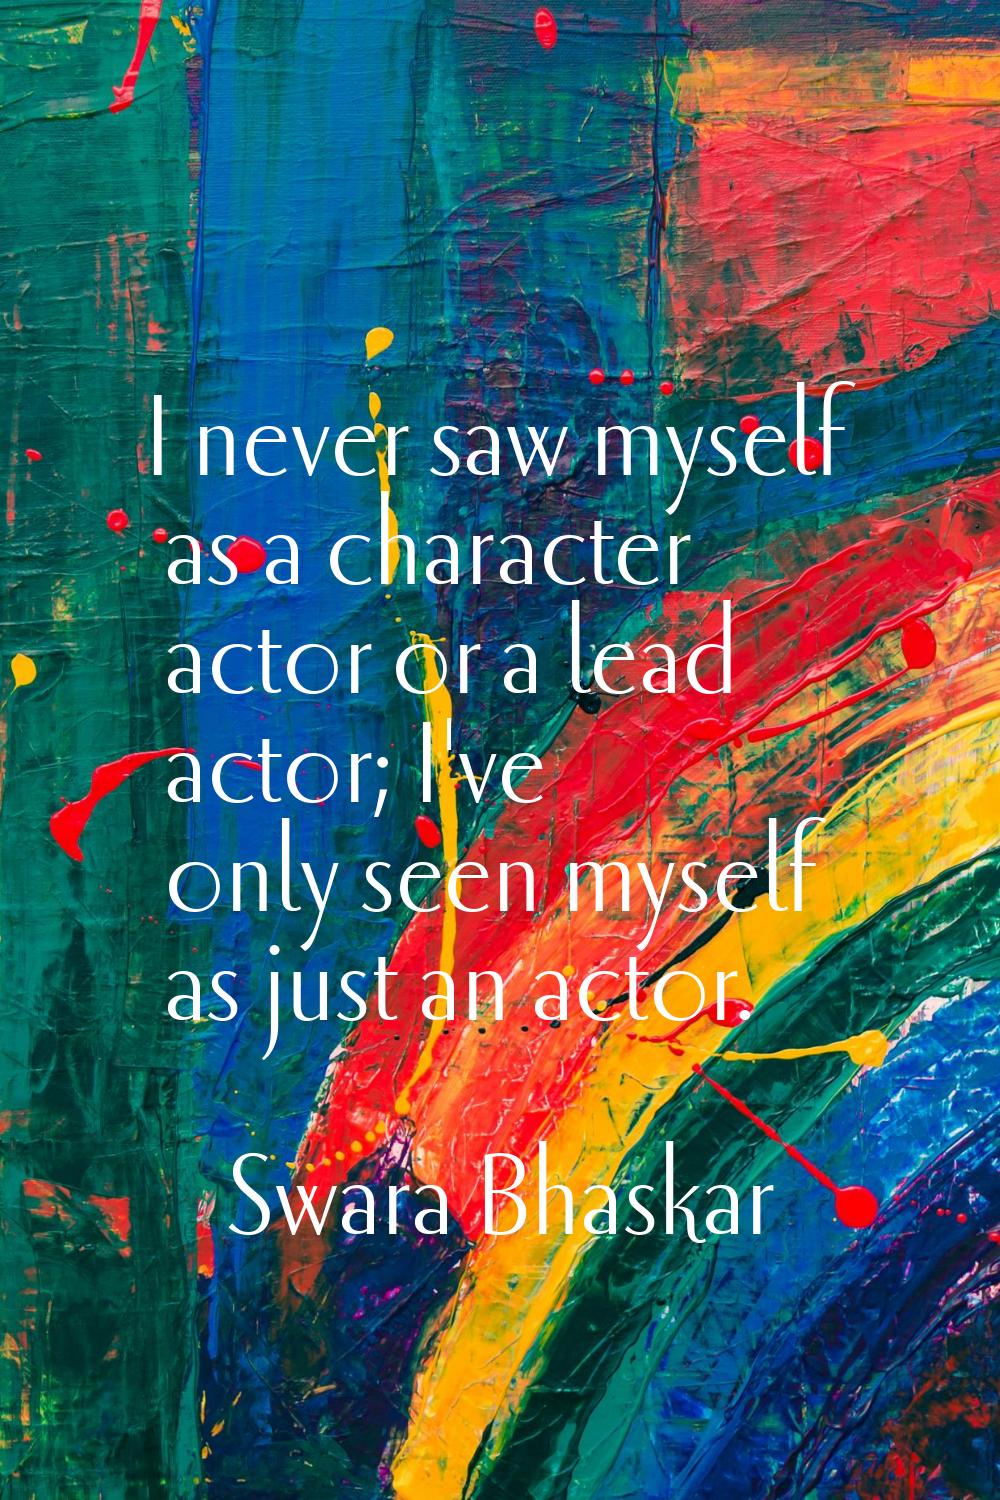 I never saw myself as a character actor or a lead actor; I've only seen myself as just an actor.